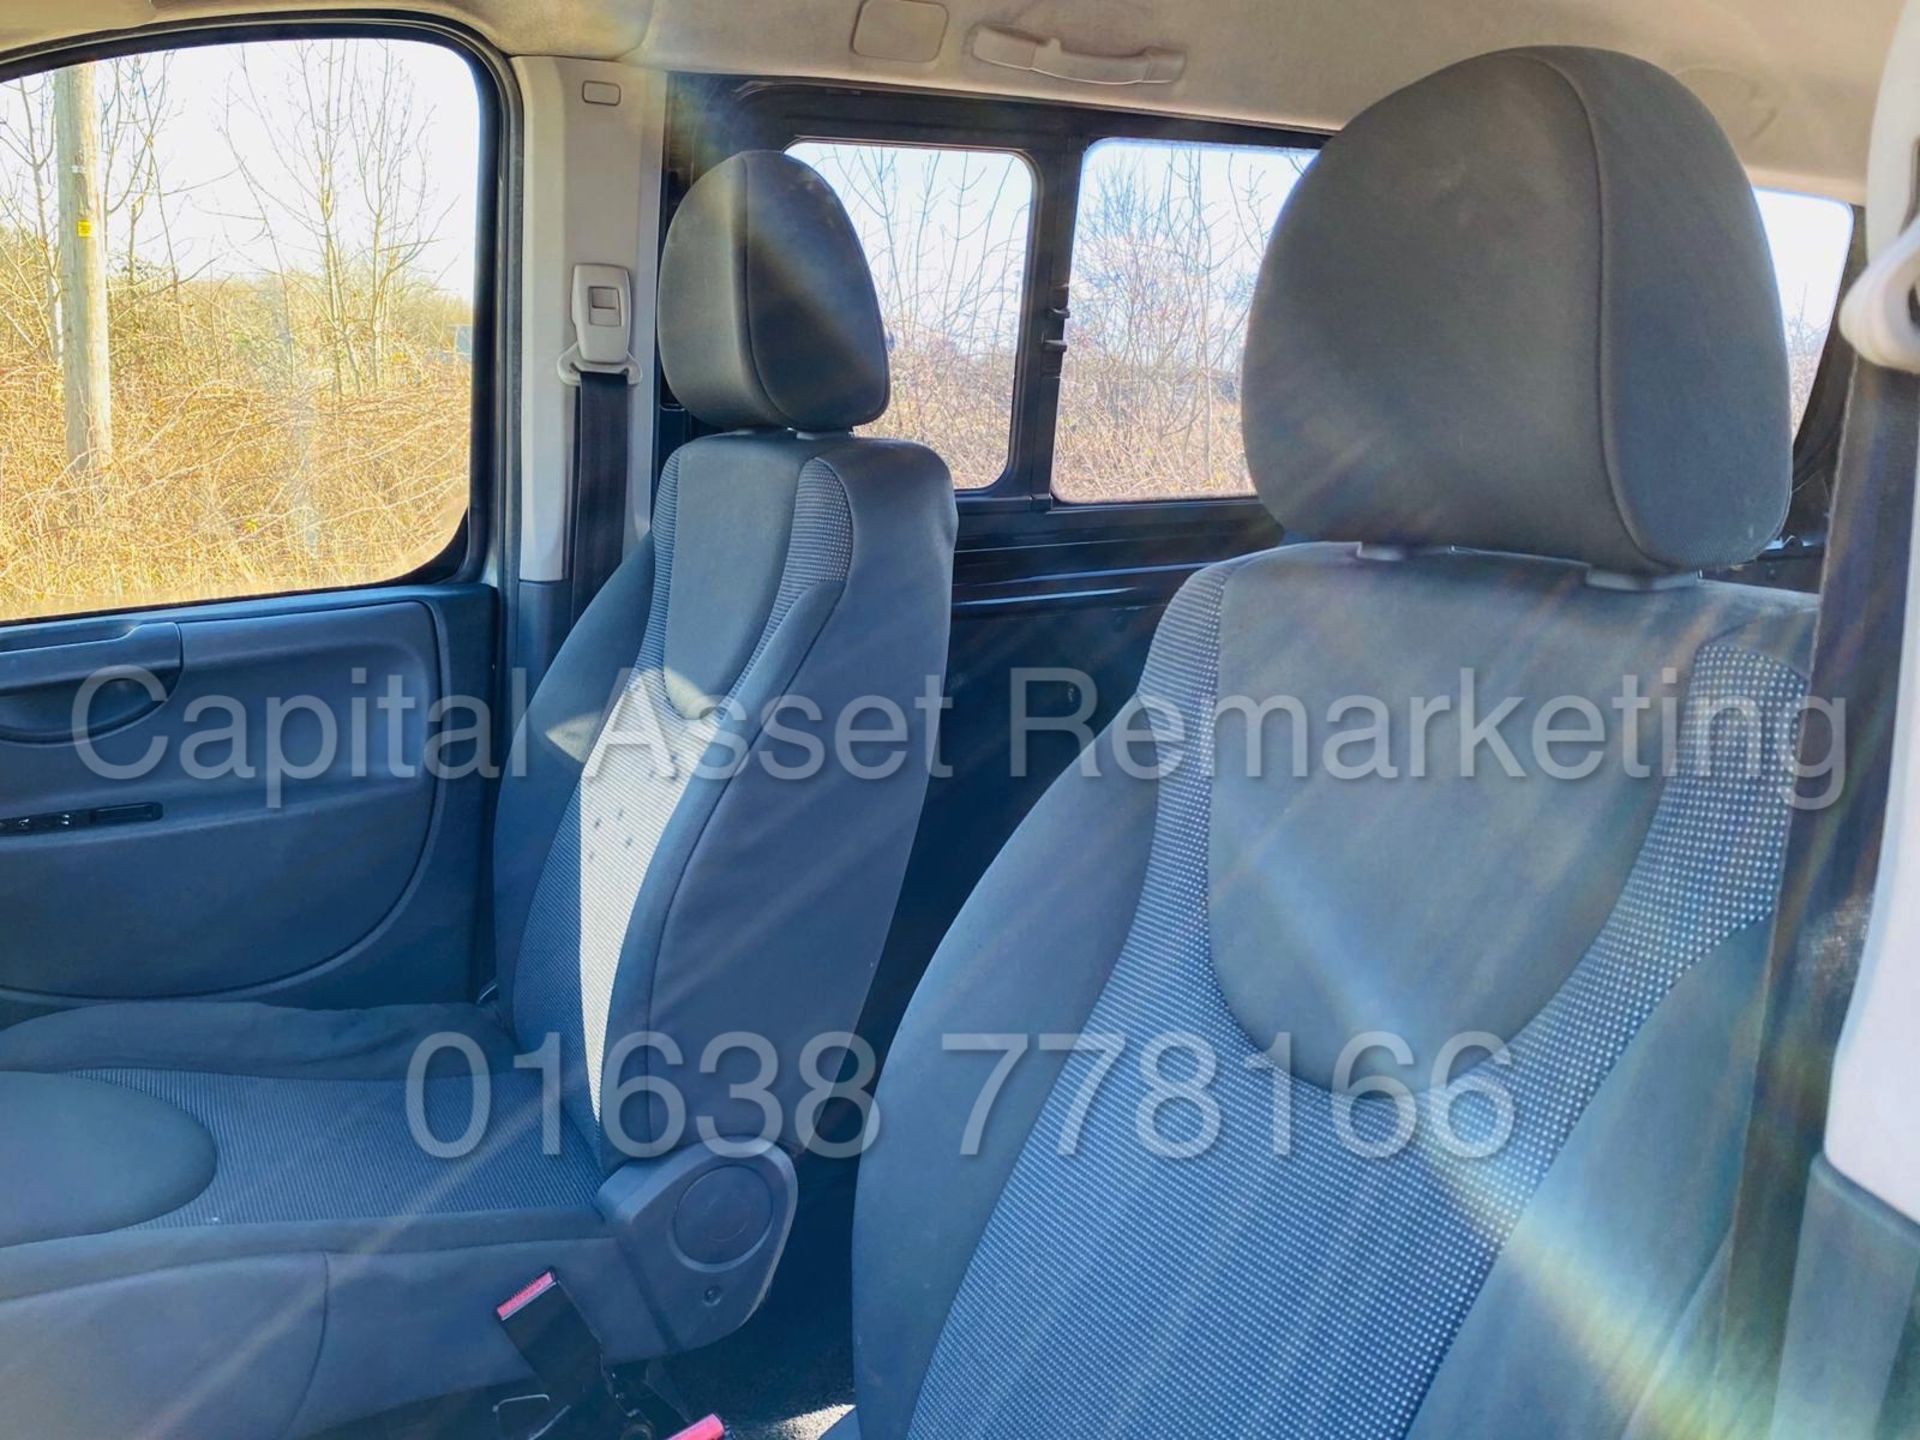 (On Sale) PEUGEOT EXPERT *TEPEE COMFORT* (61 REG) *DISABILITY / WHEEL CHAIR ACCESS VEHICLE* (NO VAT) - Image 17 of 30